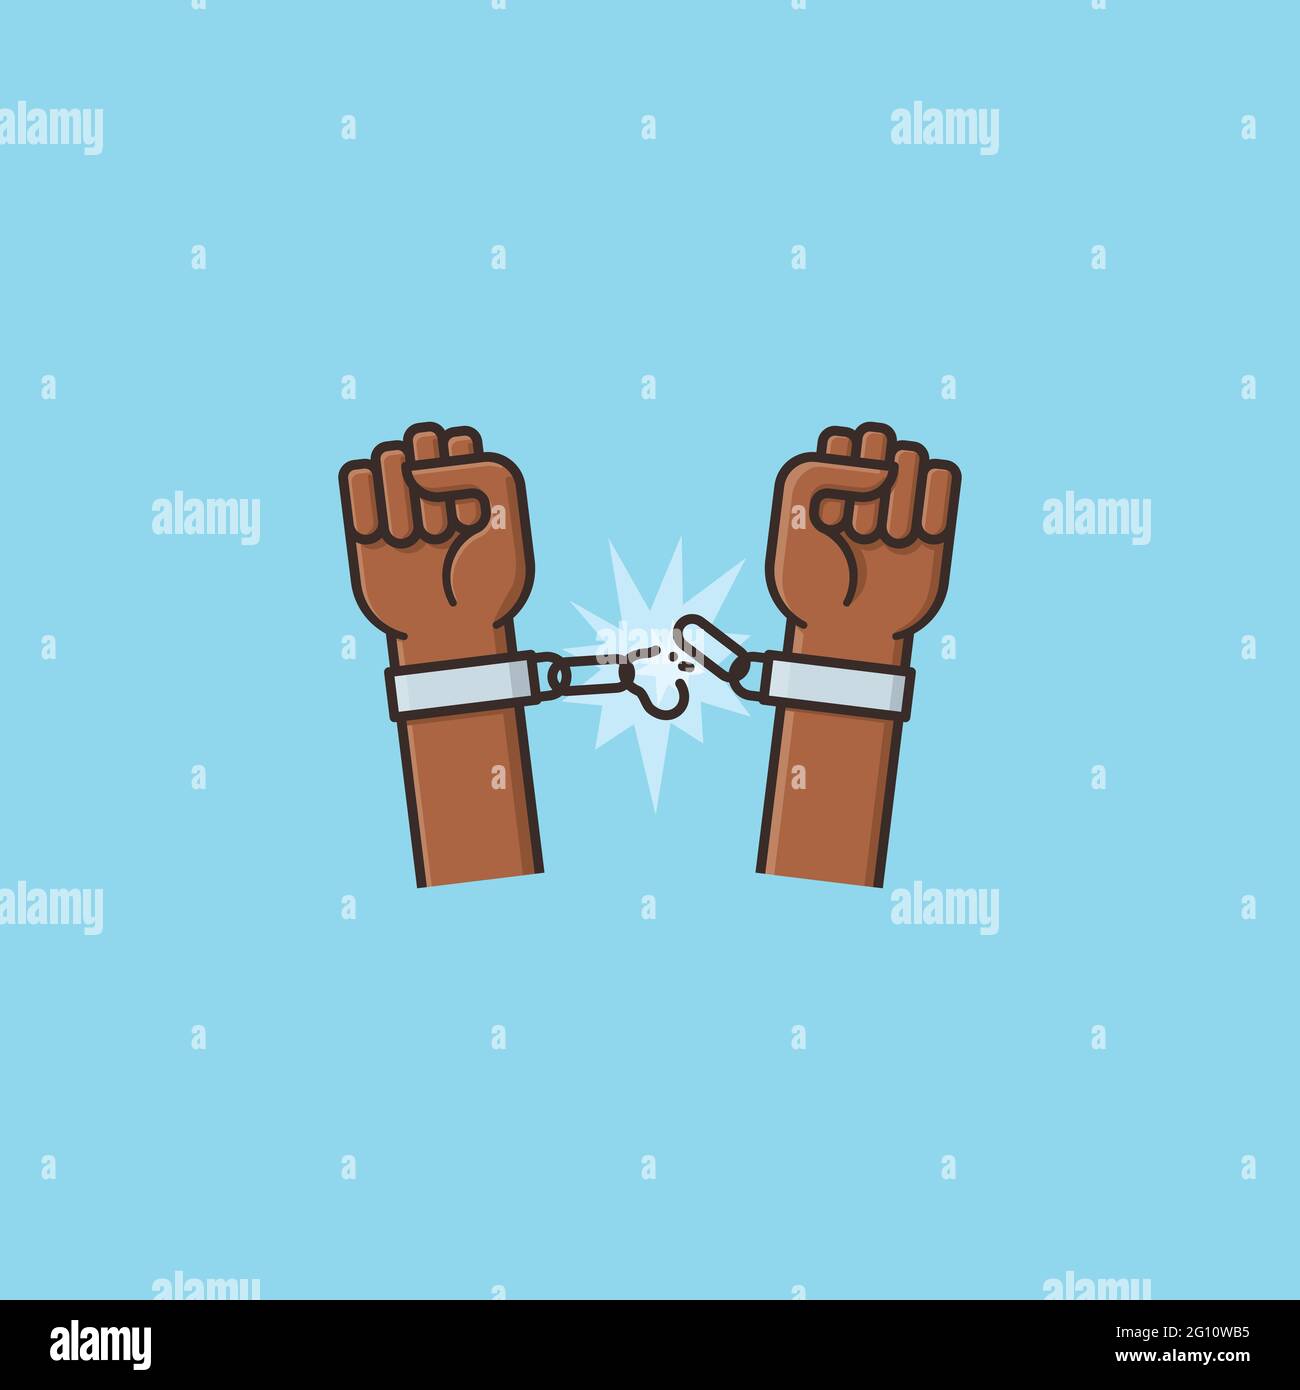 Hands freeing themselves from shackles vector illustration for International Day for the Abolition of Slavery on December 2 Stock Vector